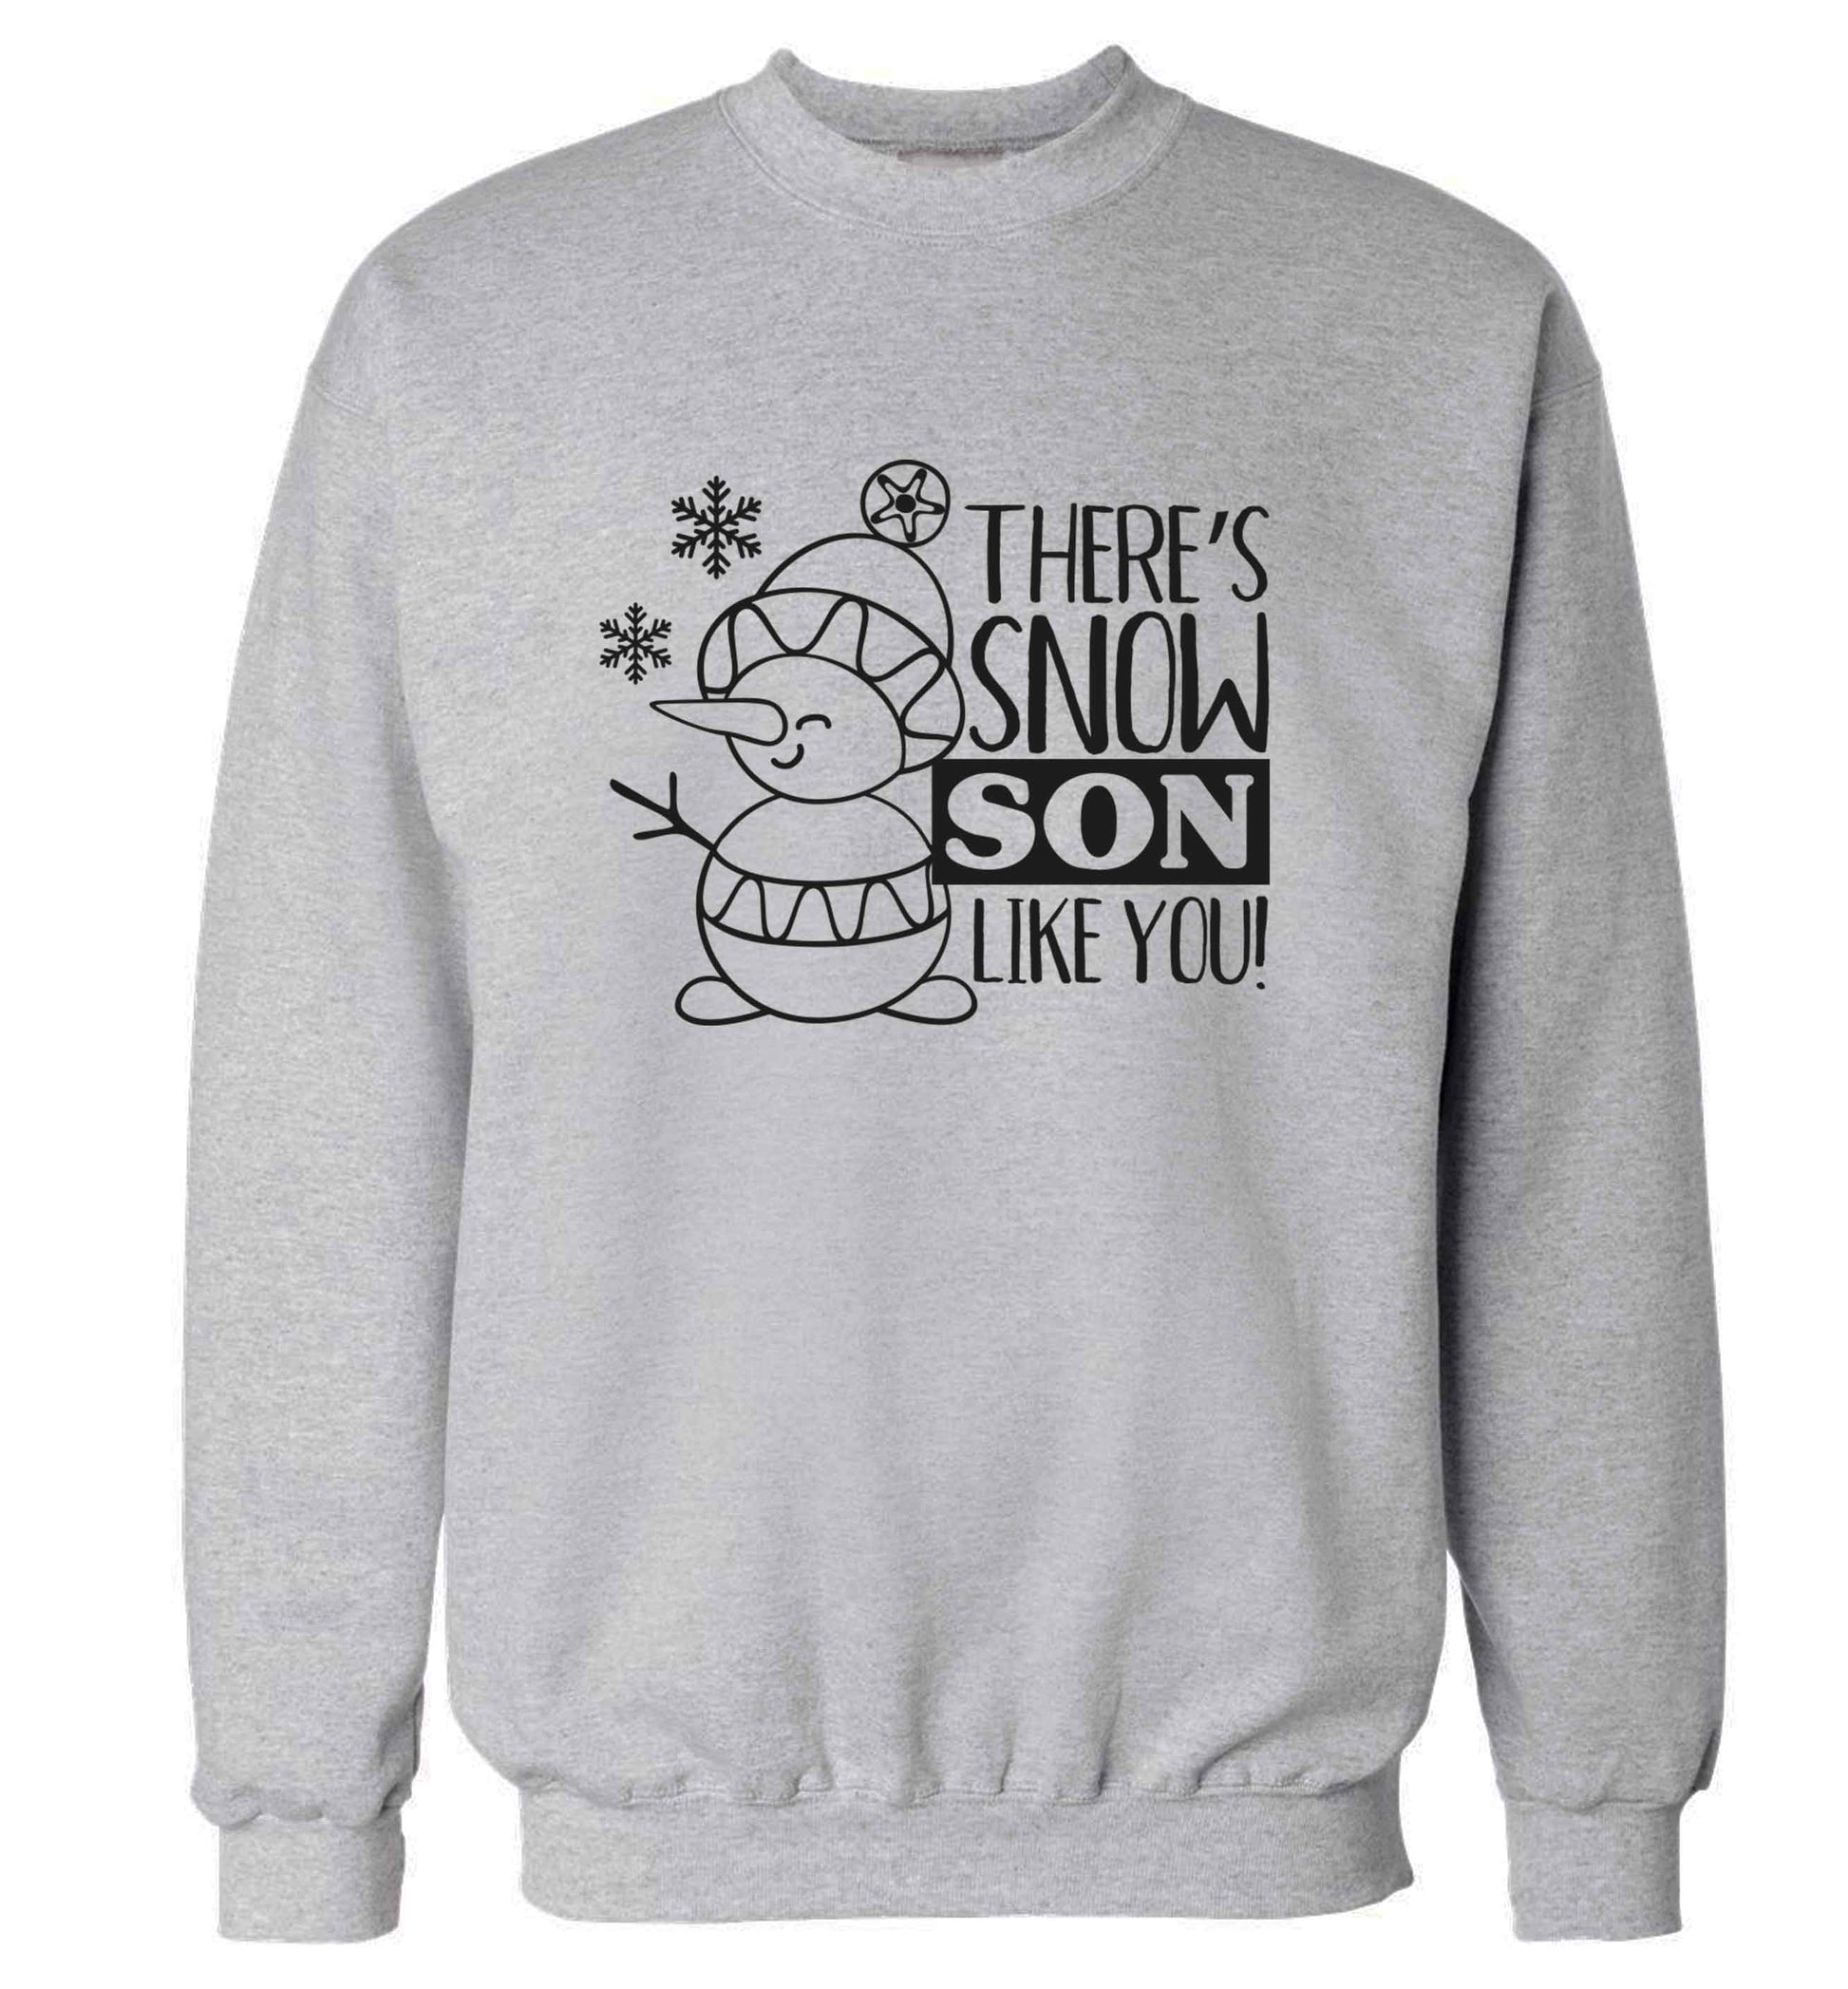 There's snow son like you adult's unisex grey sweater 2XL